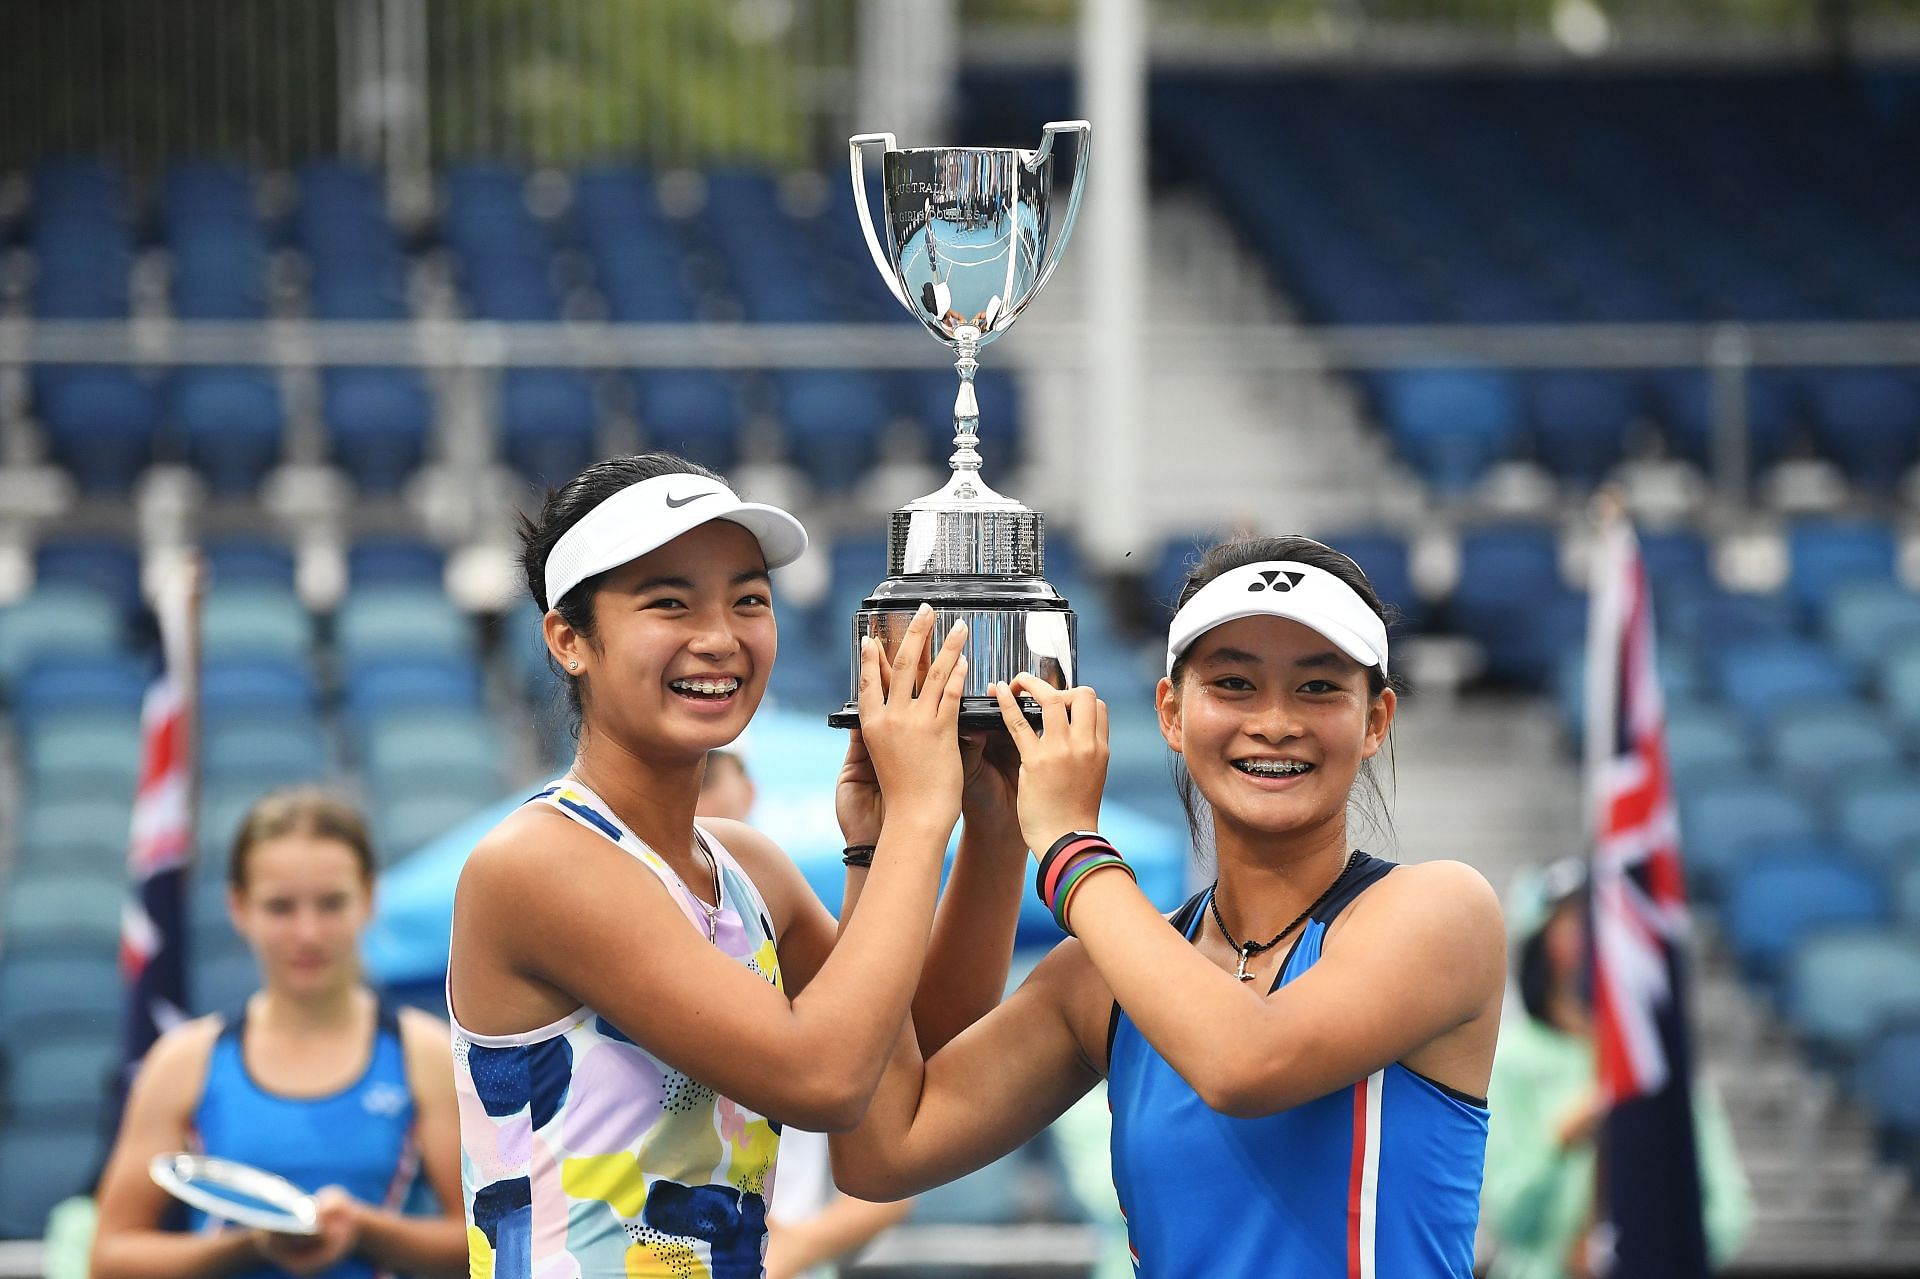 Alex Eala hoists her first doubles Grand Slam trophy together with partner Priska Madelyn Nugroho of Indonesia in the 2020 Australian Open